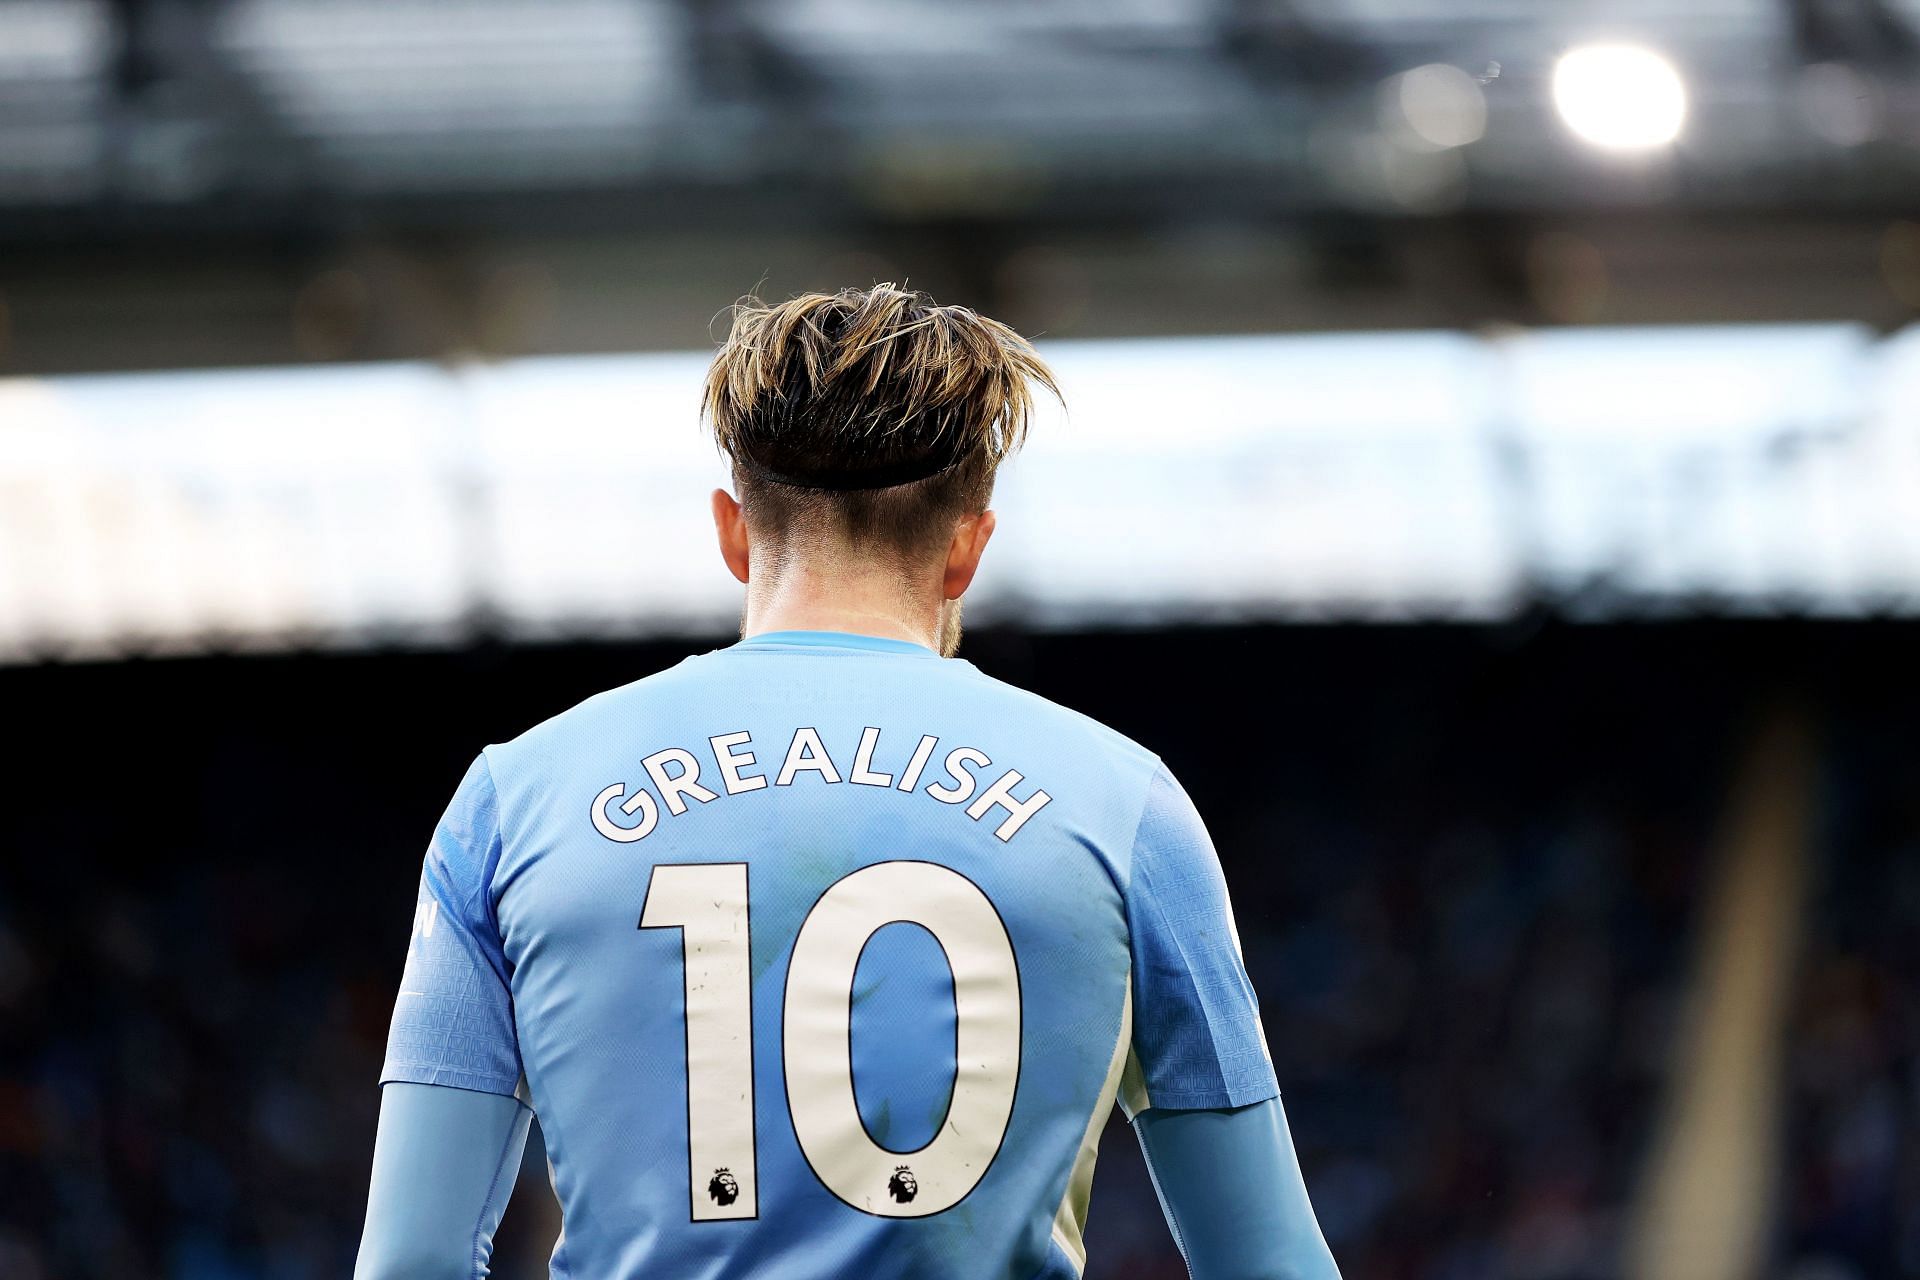 Grealish became the most expensive signing ever in the Premier League